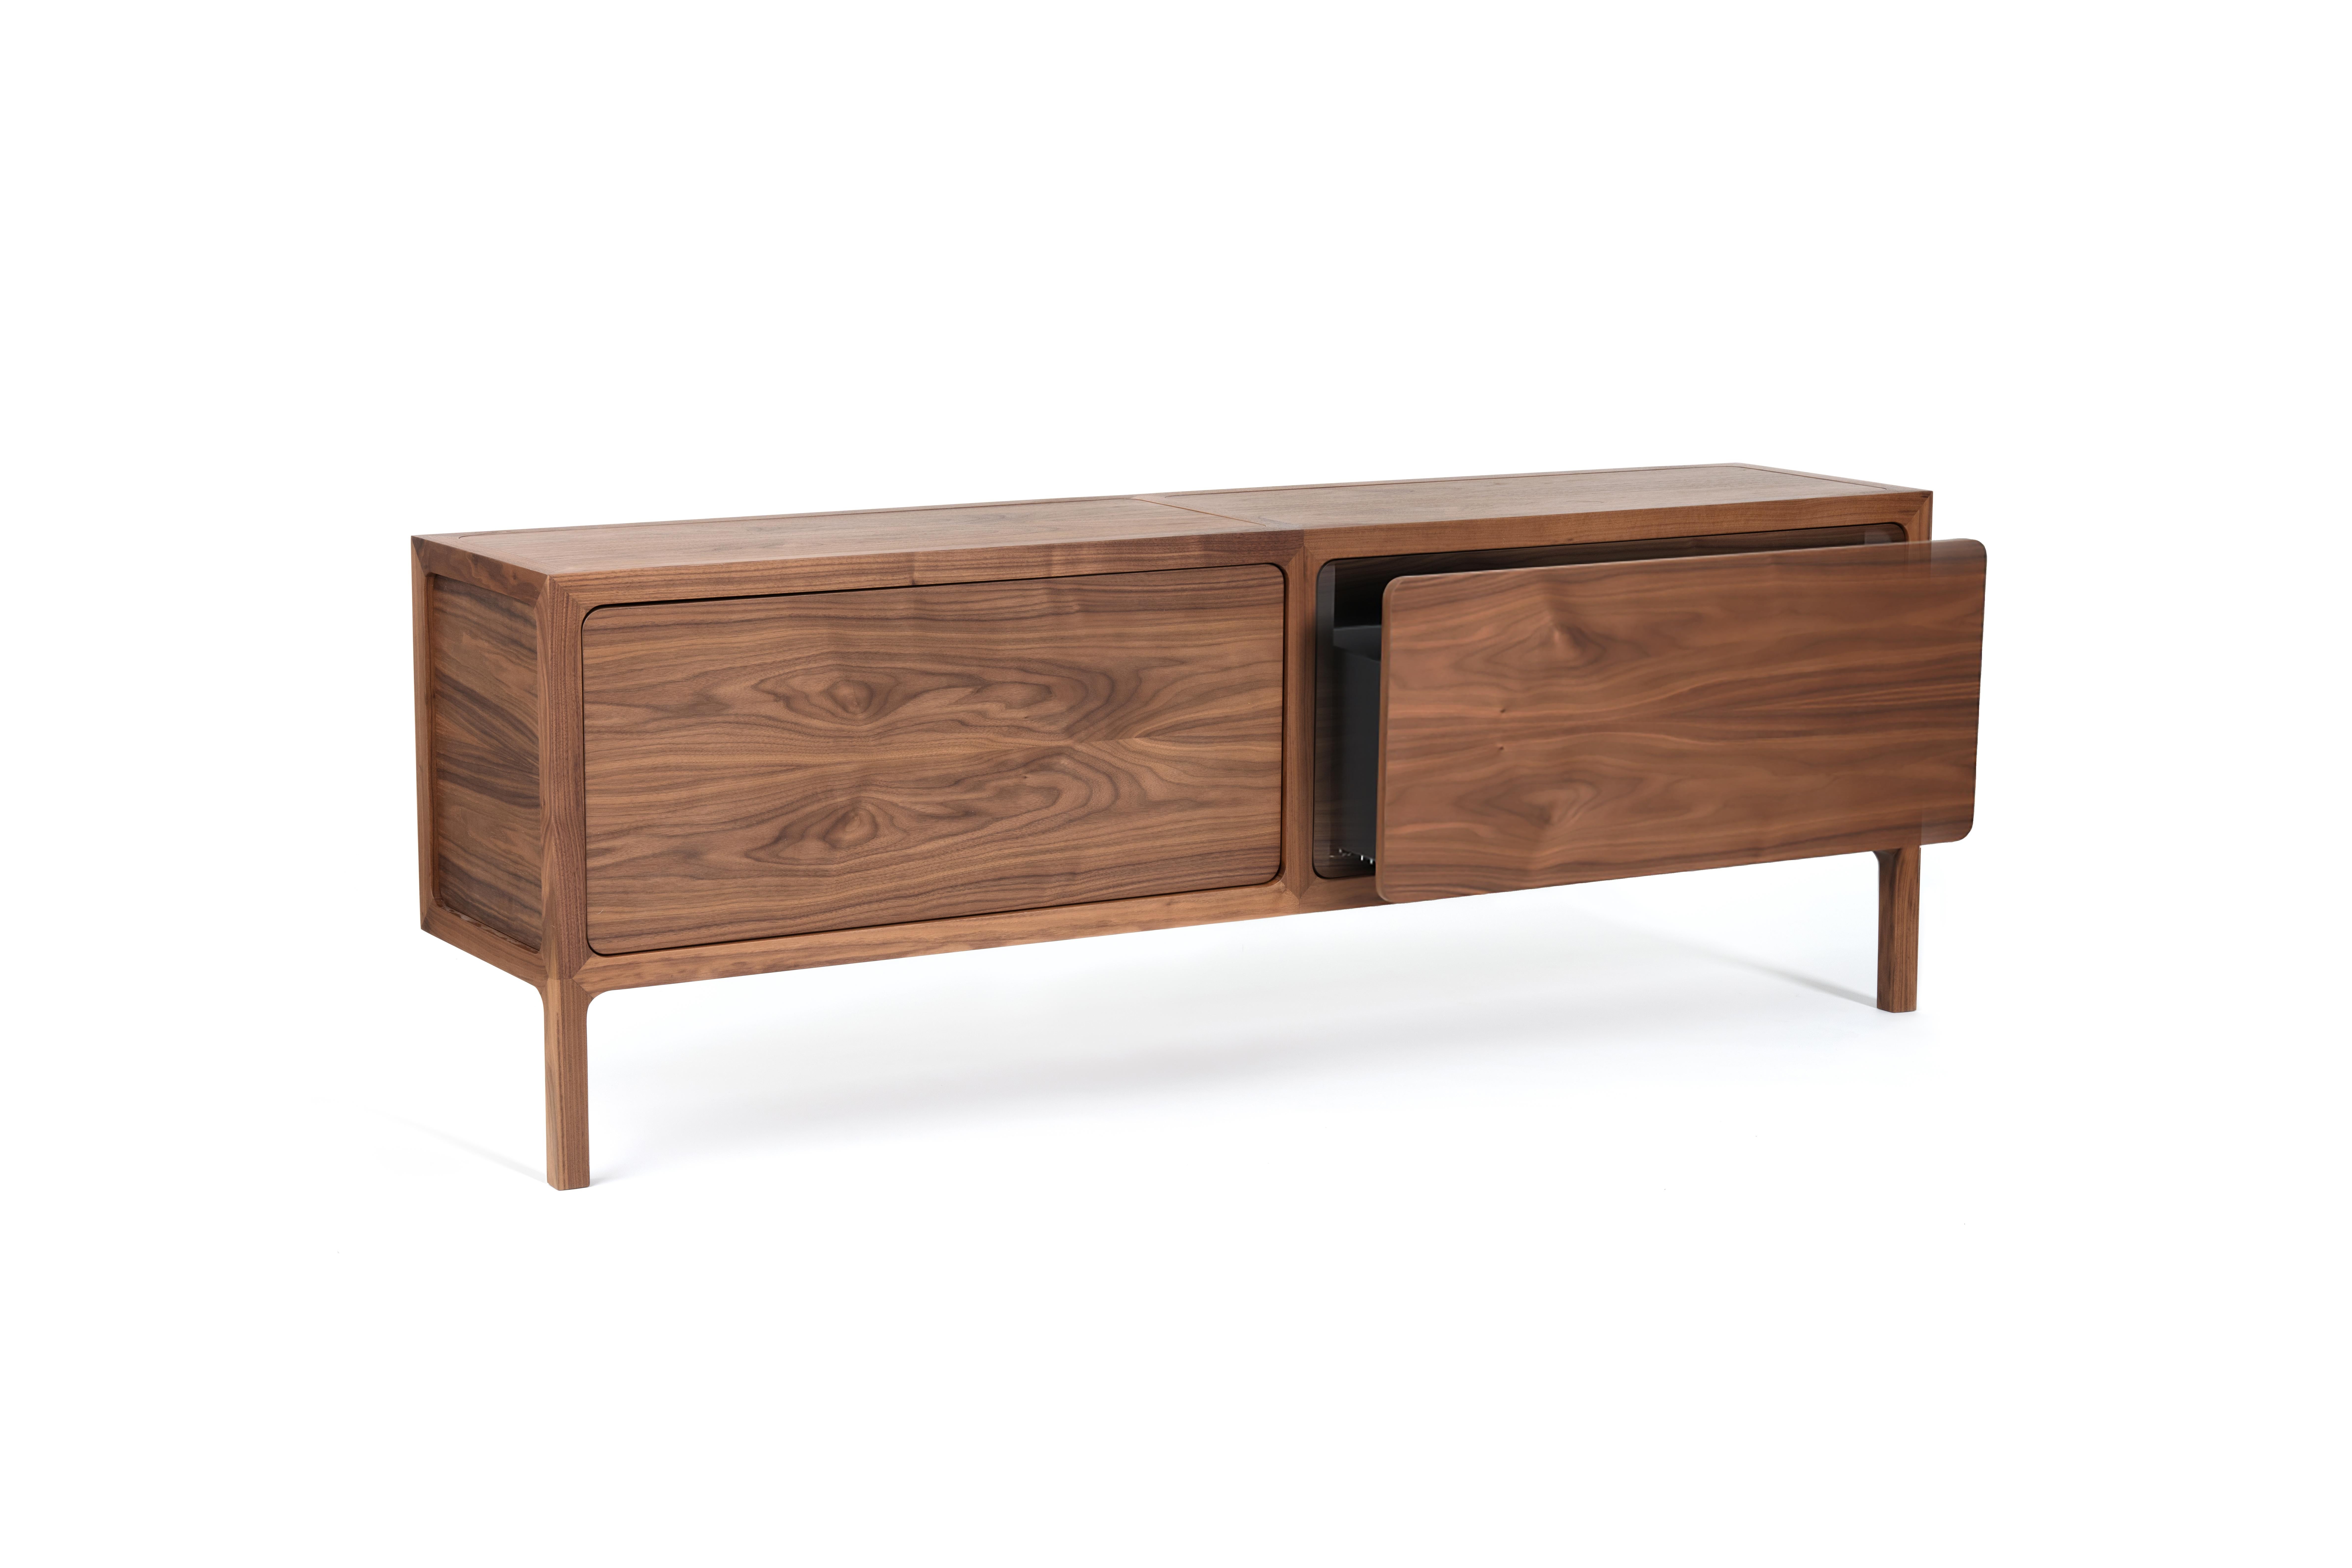 Less walnut cabinet by Mentemano
Dimensions: W200 x D 44 x H 72 cm
Materials: Walnut 


The design comes from a subtraction process making a focus on the basic frame of Less. The whole structure is made of solid wood and based on clean lines